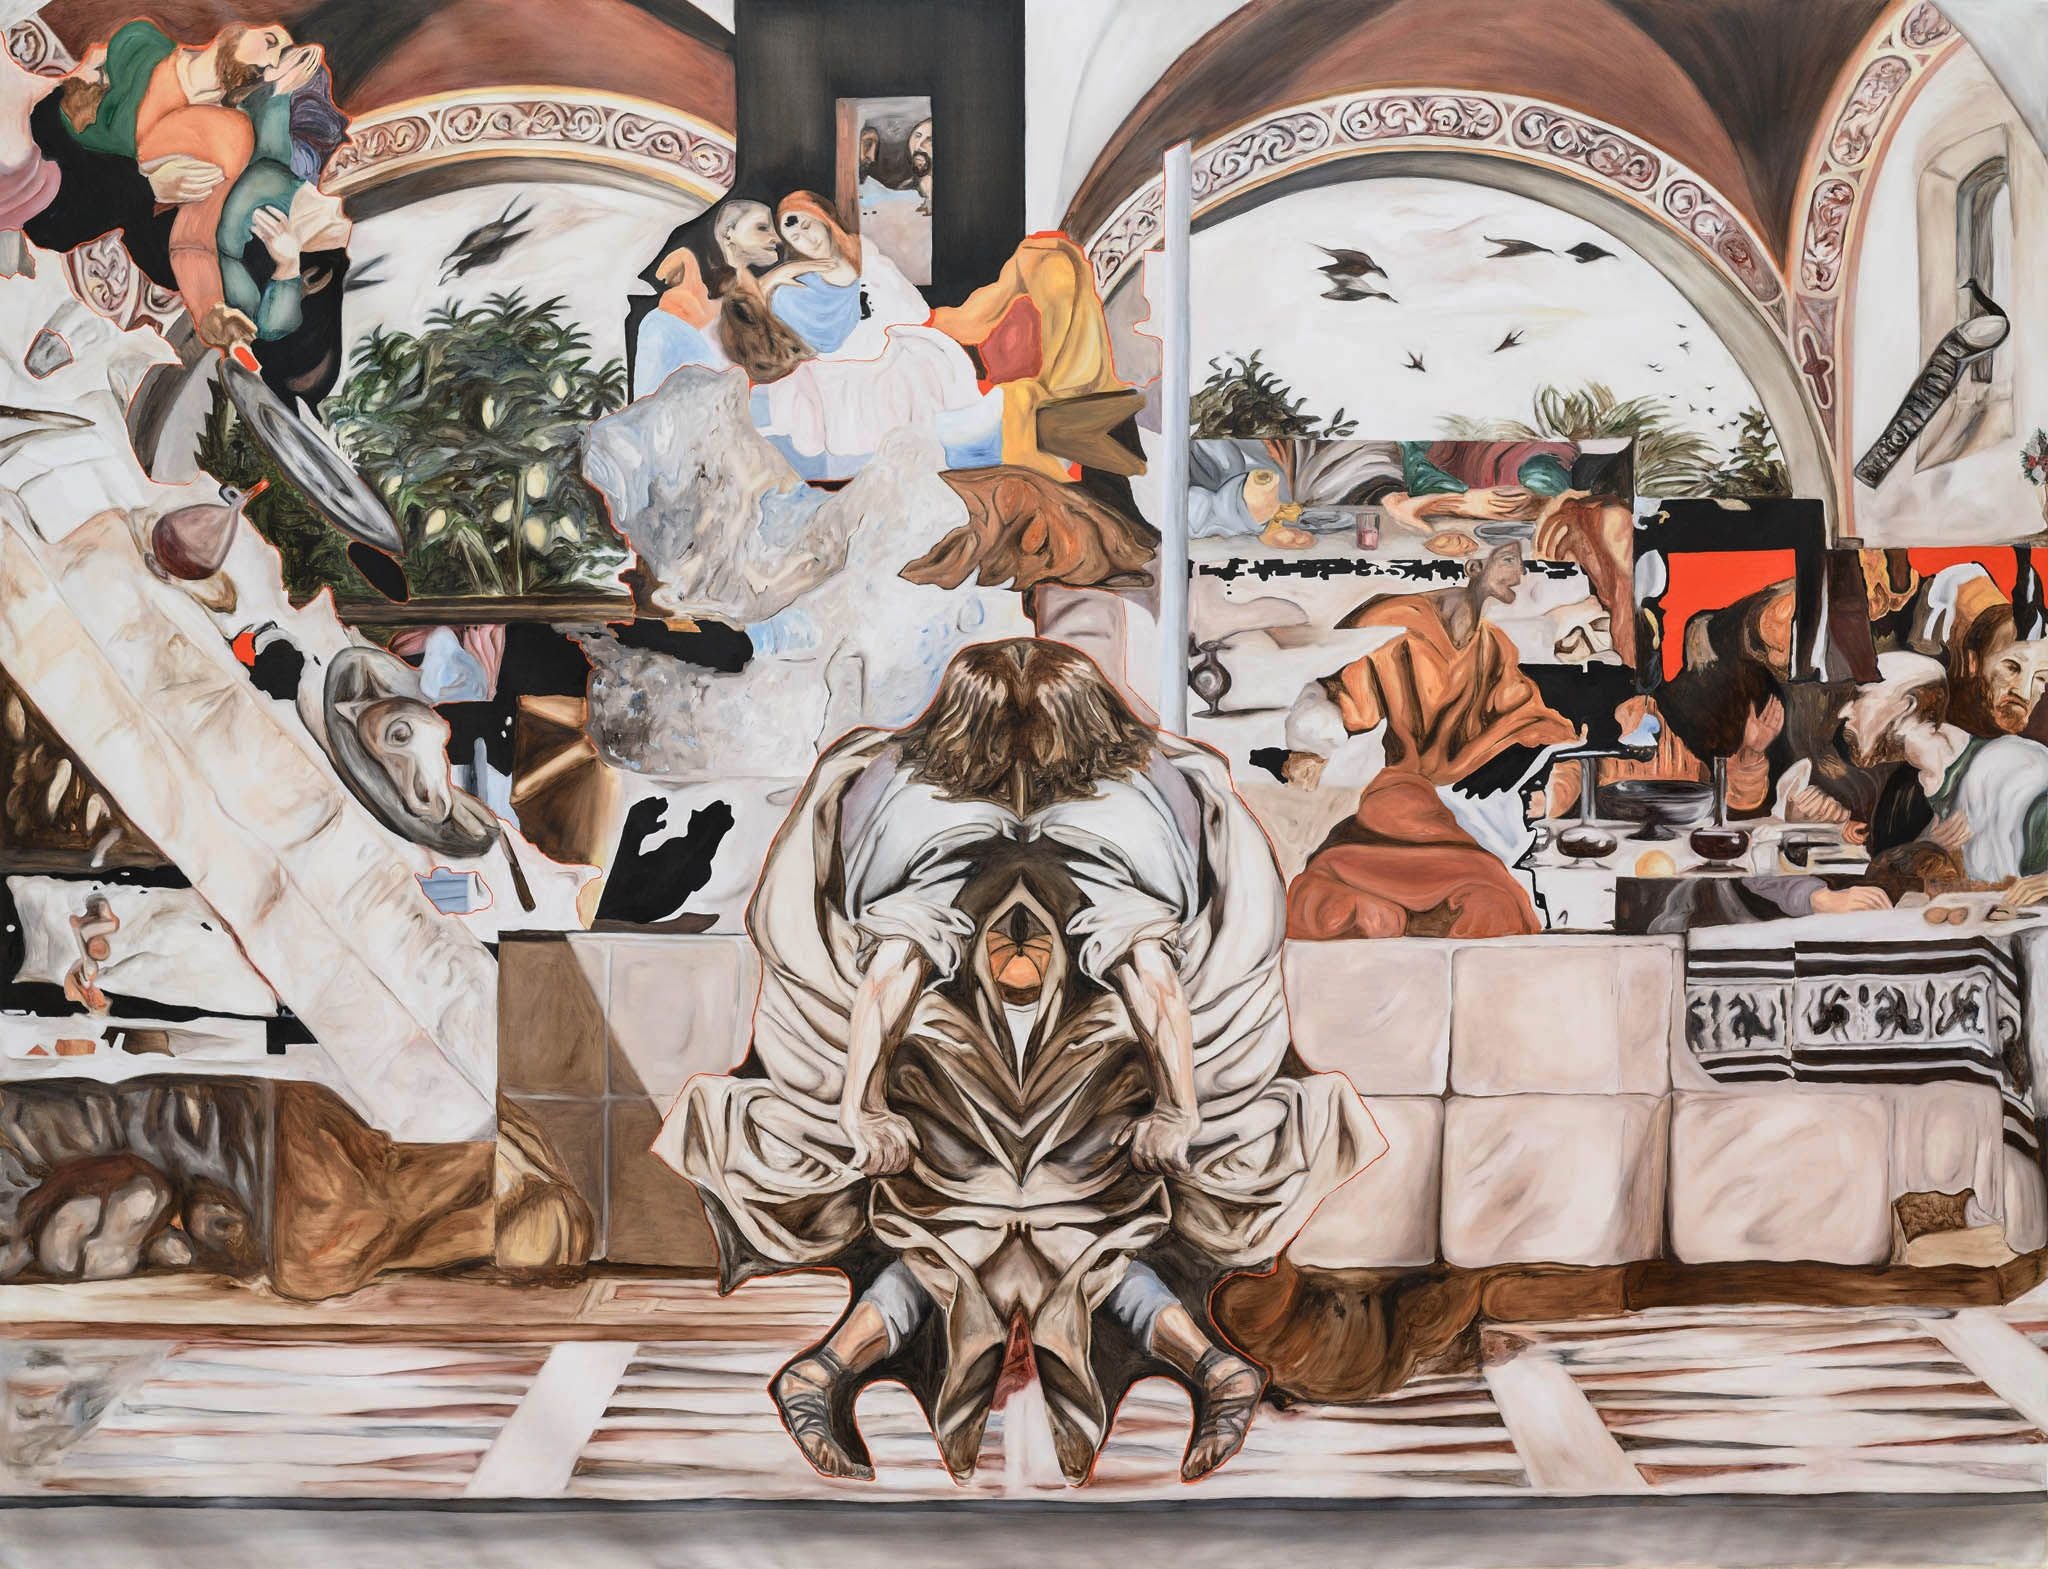 Alessandro Giannì, "Due to the Image (The Last Supper)"